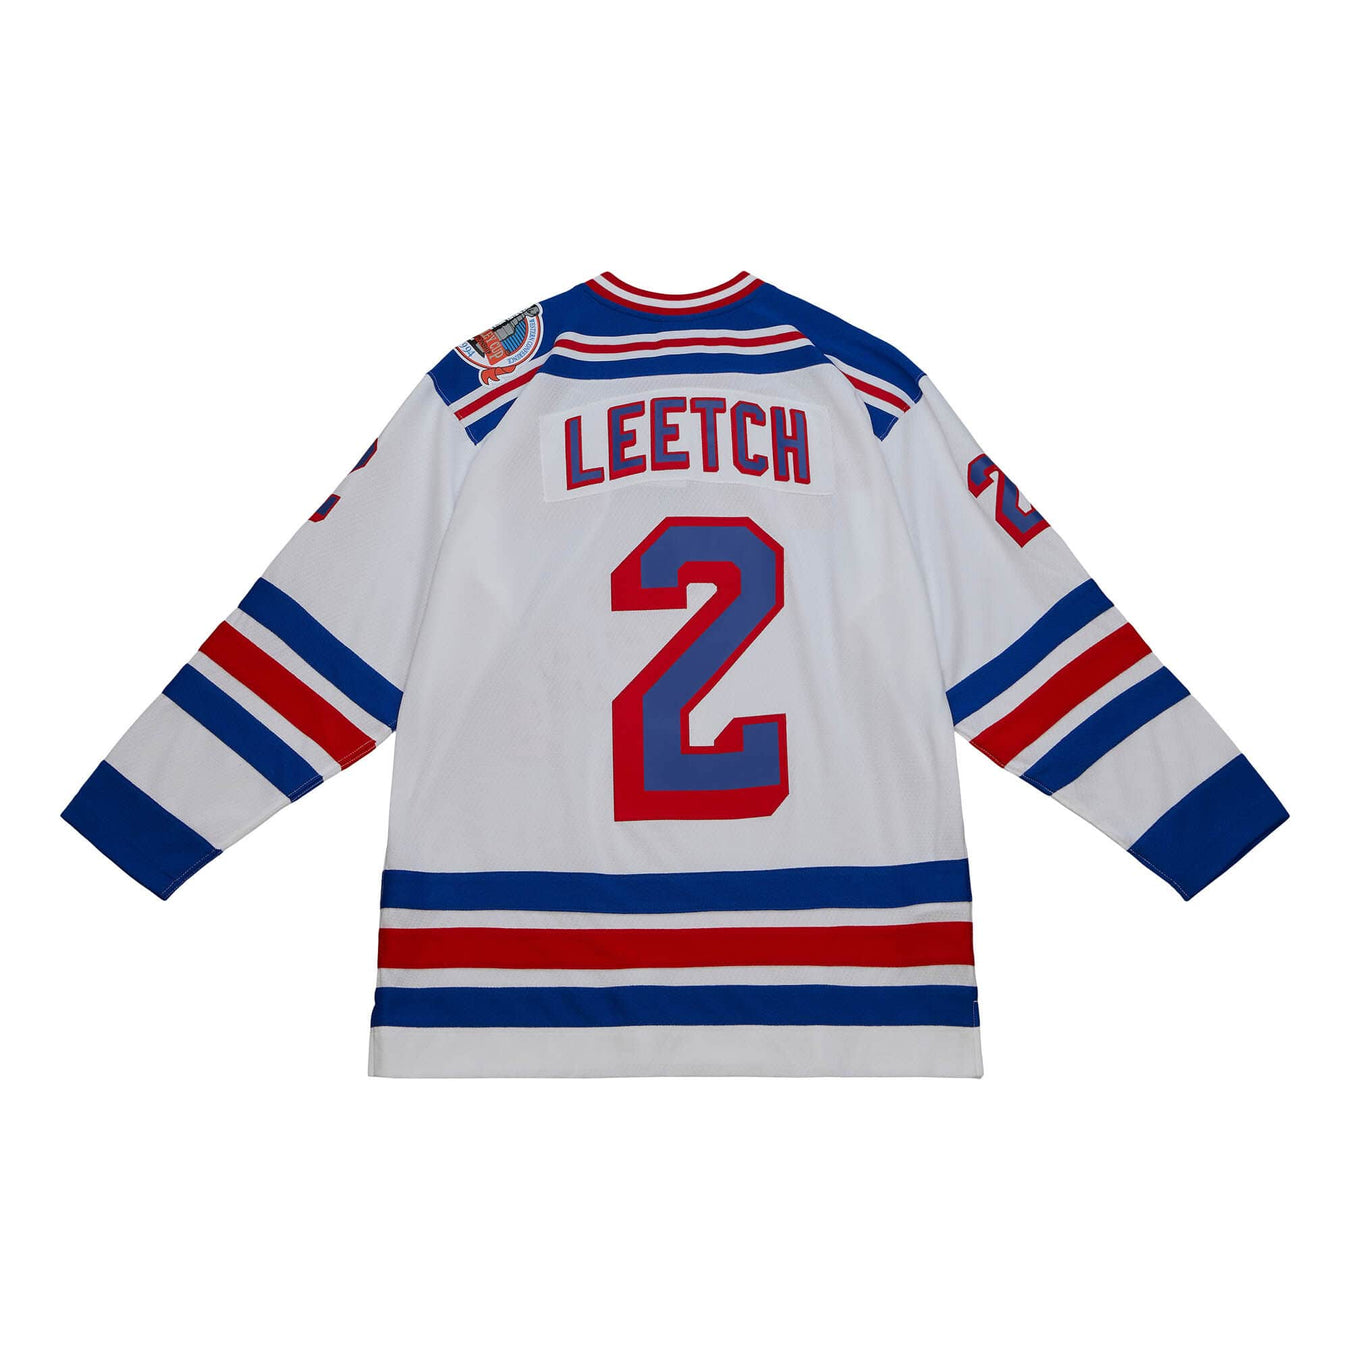 Brian Leetch NHL Jerseys, Apparel and Collectibles